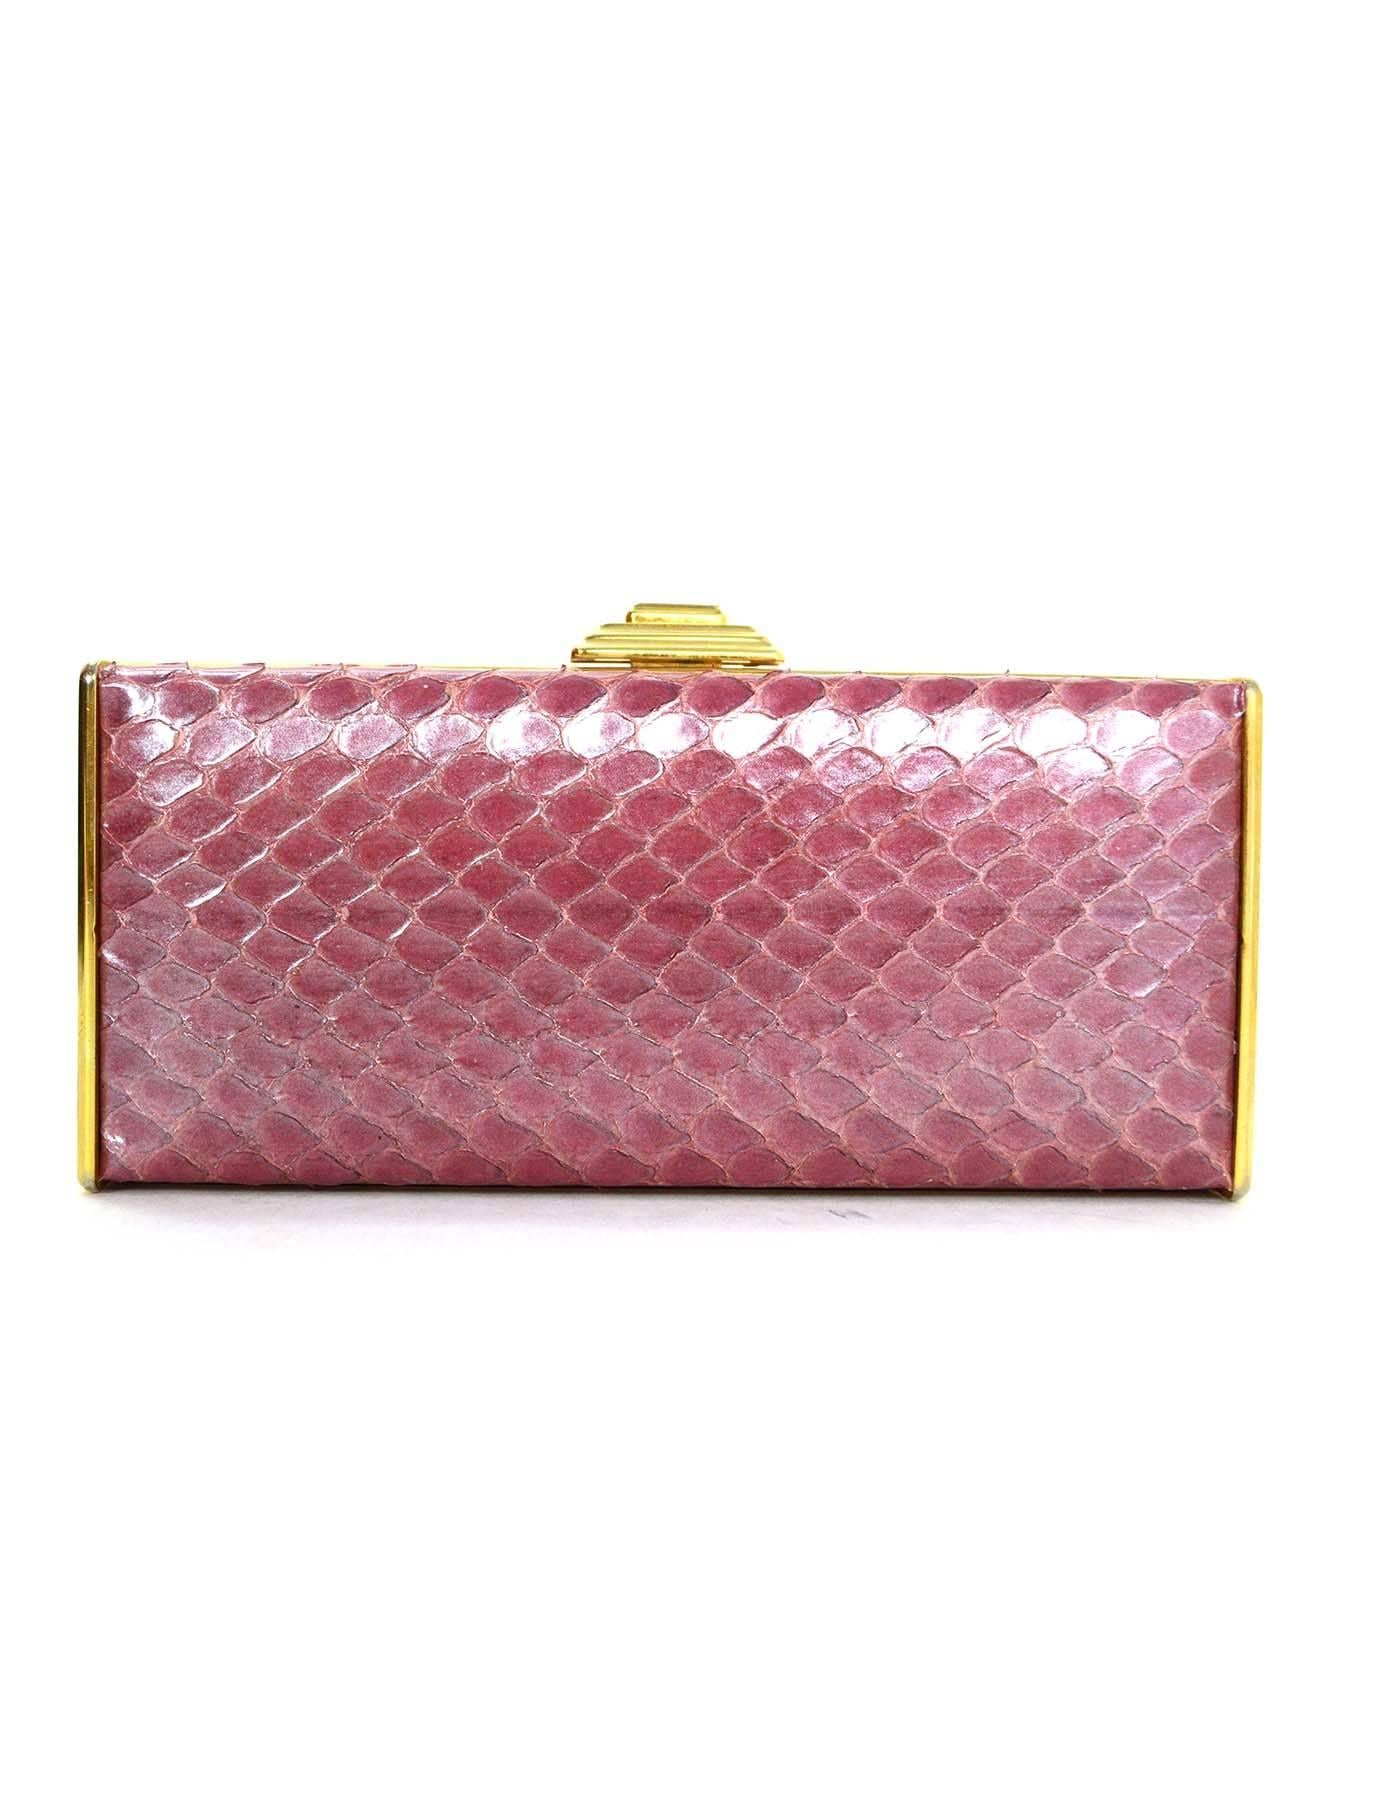 Judith Leiber Iridescent Pink Python & Crystal Minaudiere GHW In Excellent Condition In New York, NY